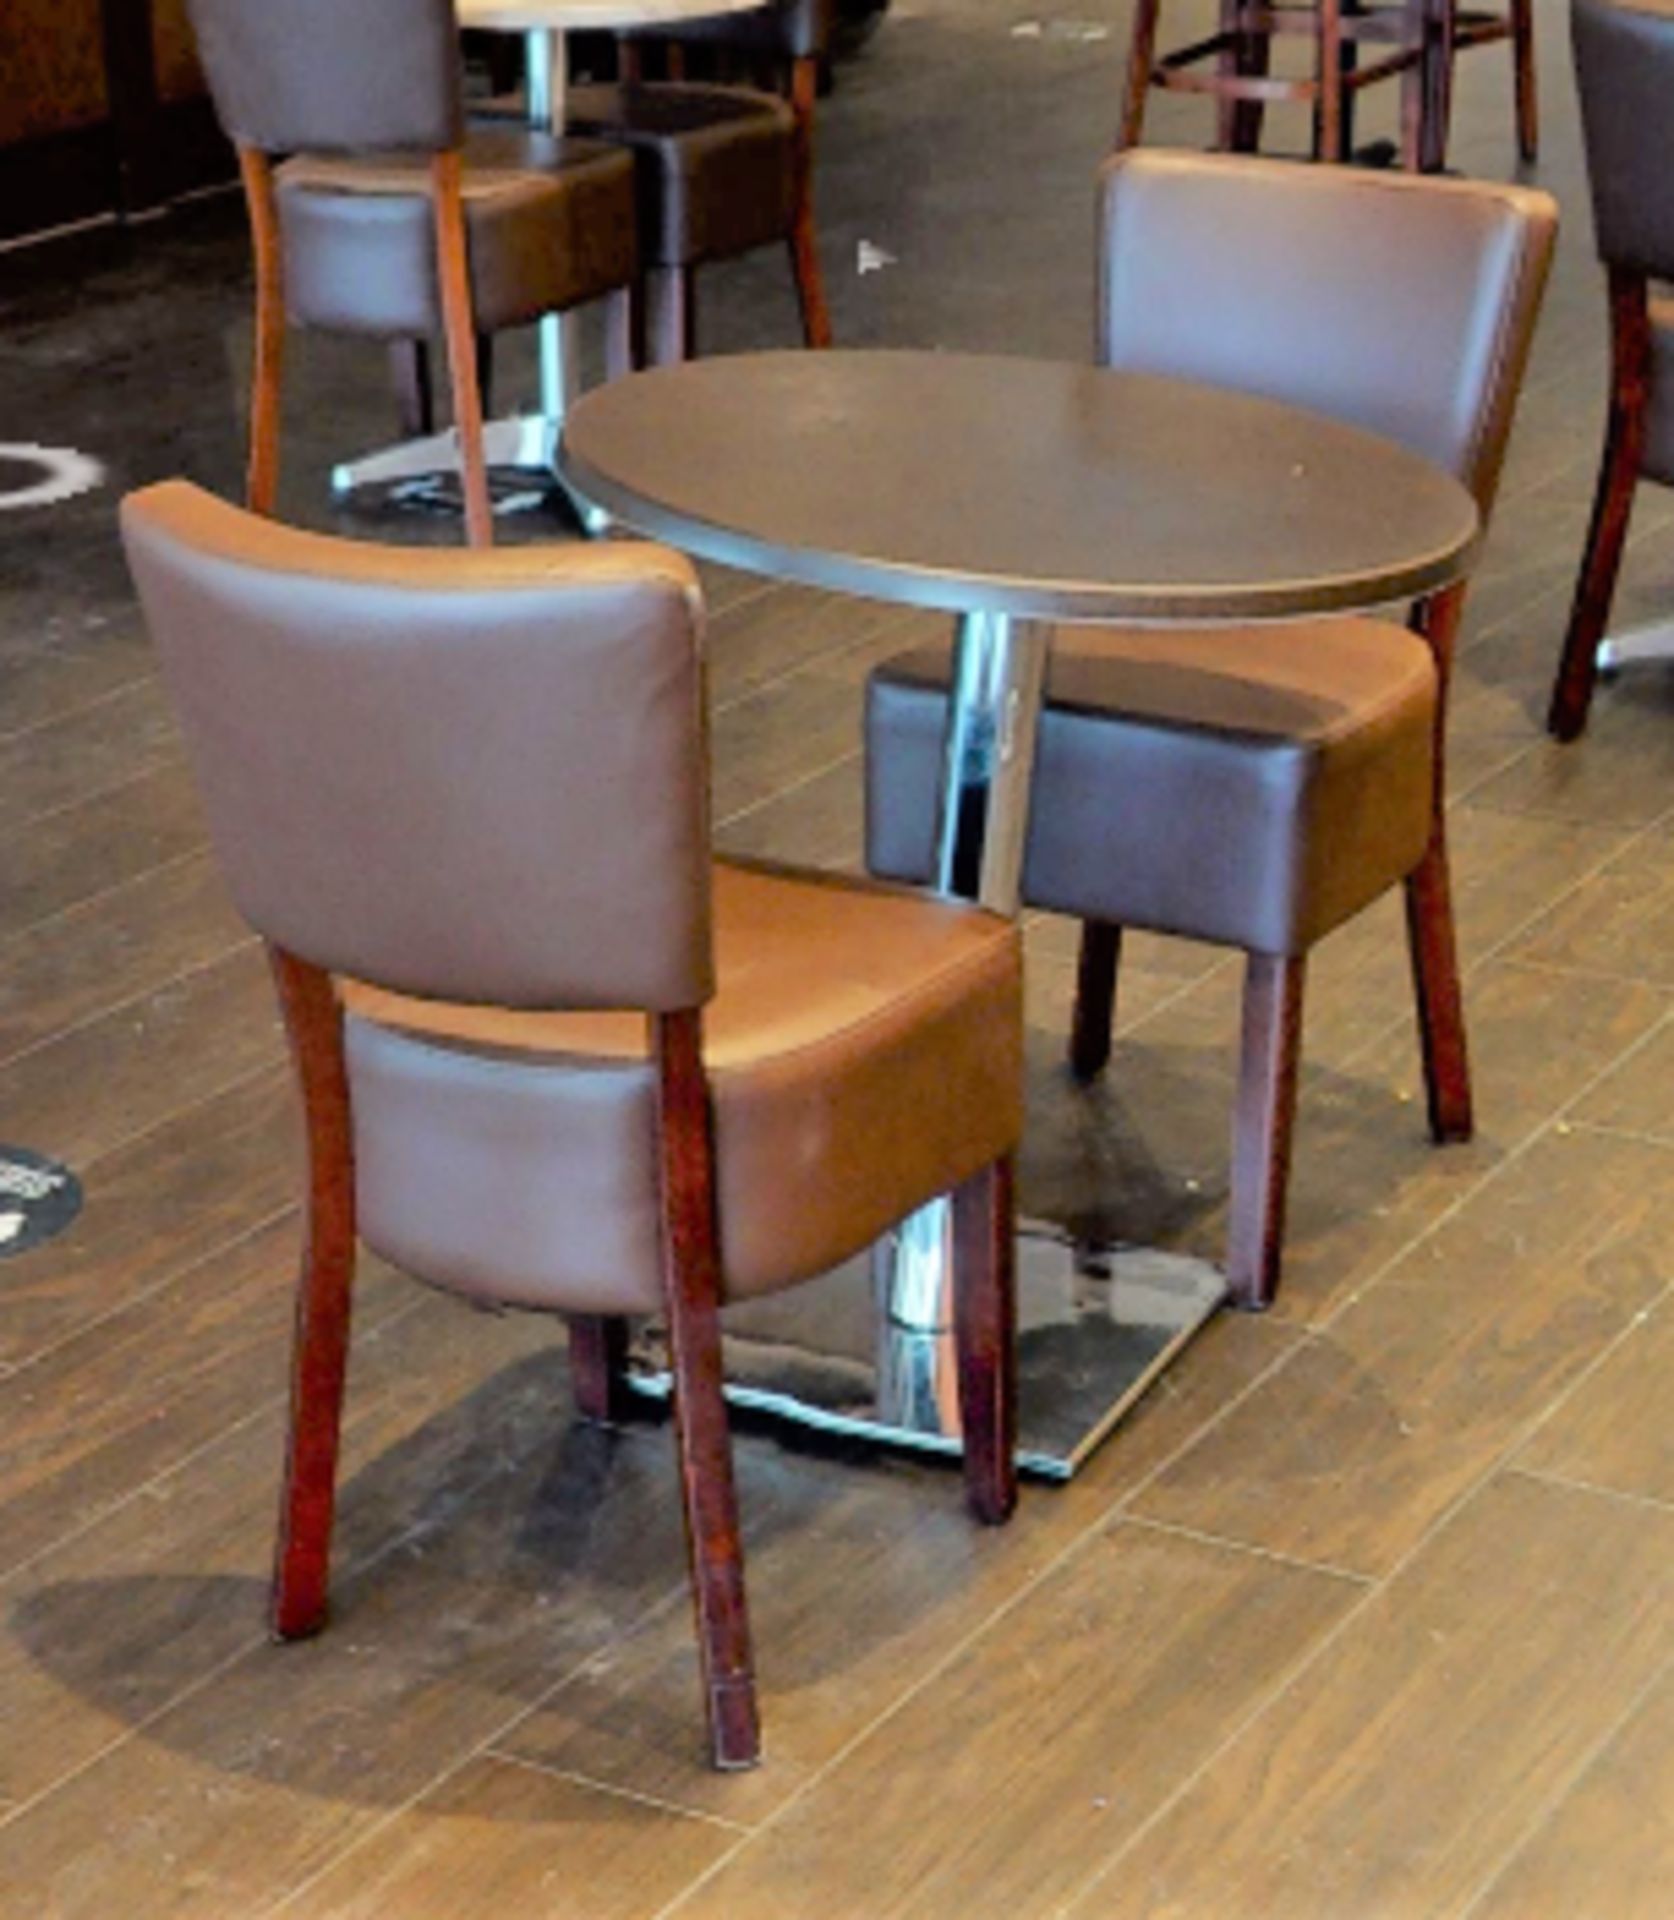 4 x Restaurant Chairs With Brown Leather Seat Pads and Padded Backrests - CL701 - Location: Ashton - Image 2 of 9